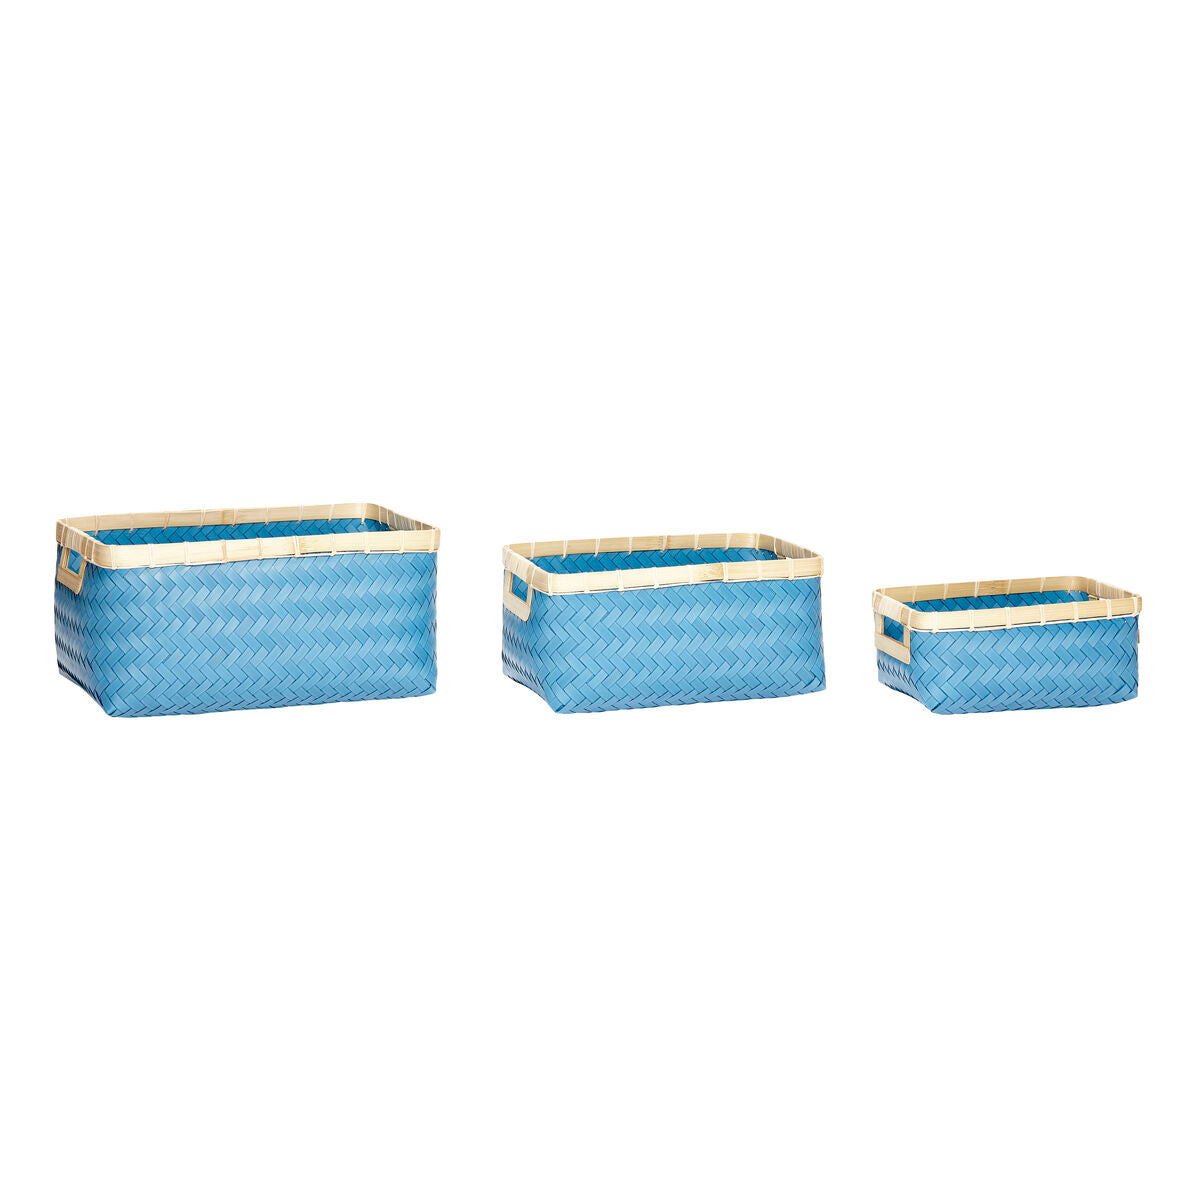 Wicked Baskets Blue/Natural (set of 3)